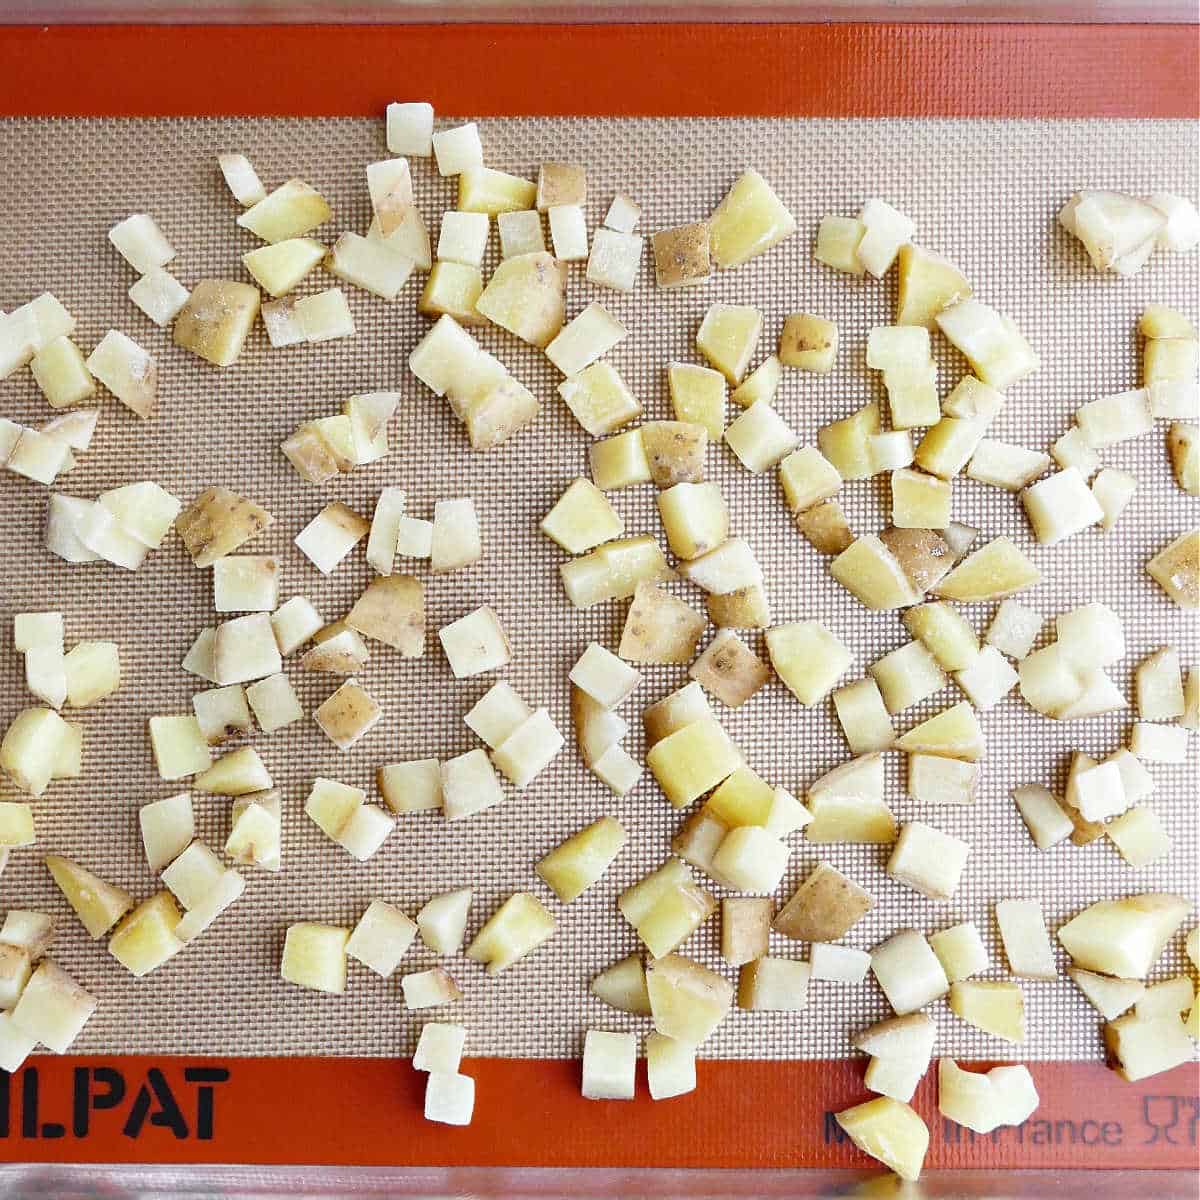 blanched potato cubes spread out on a baking sheet lined with a silicone mat